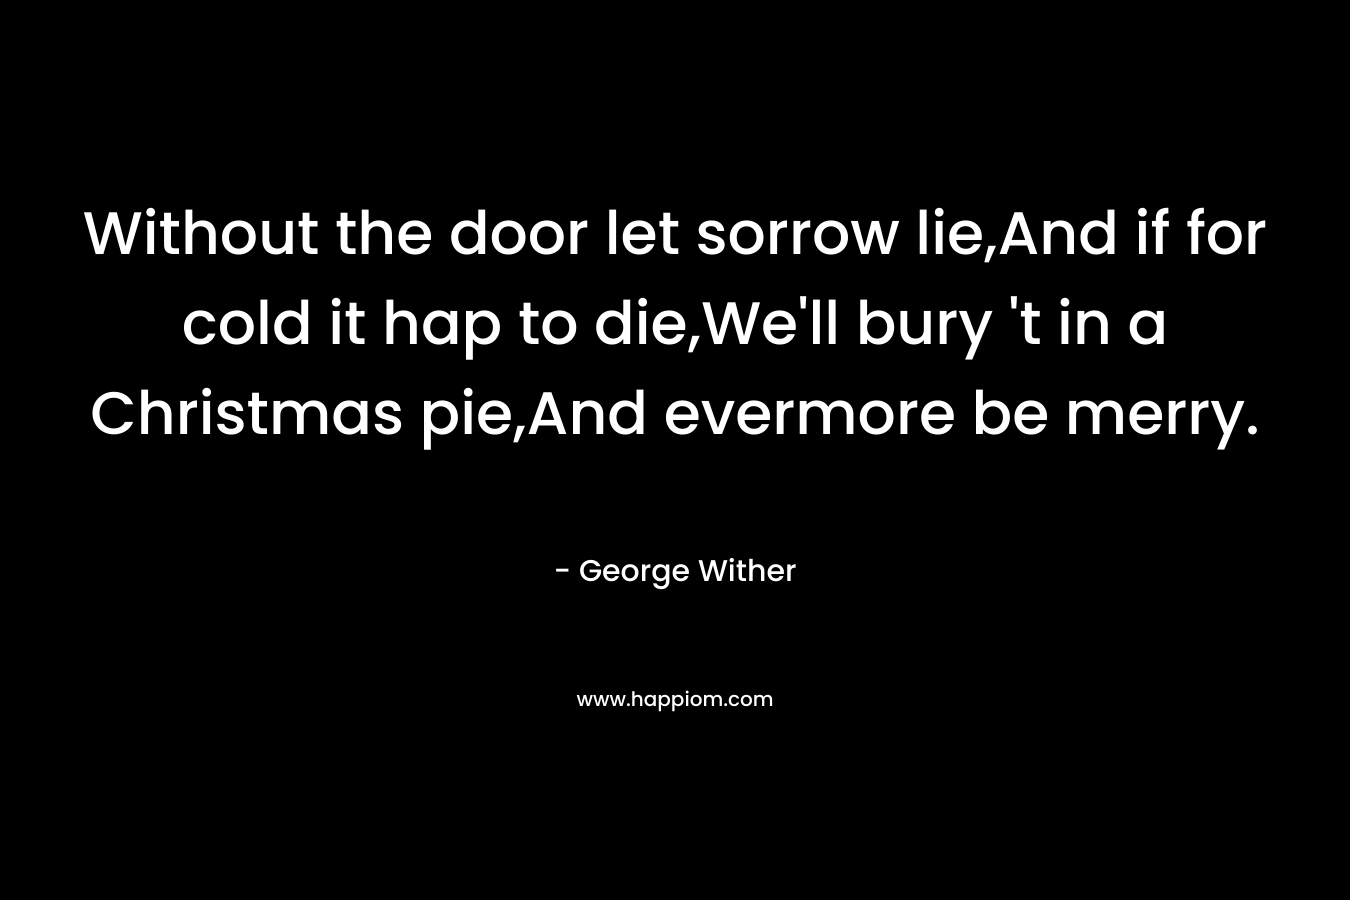 Without the door let sorrow lie,And if for cold it hap to die,We'll bury 't in a Christmas pie,And evermore be merry.